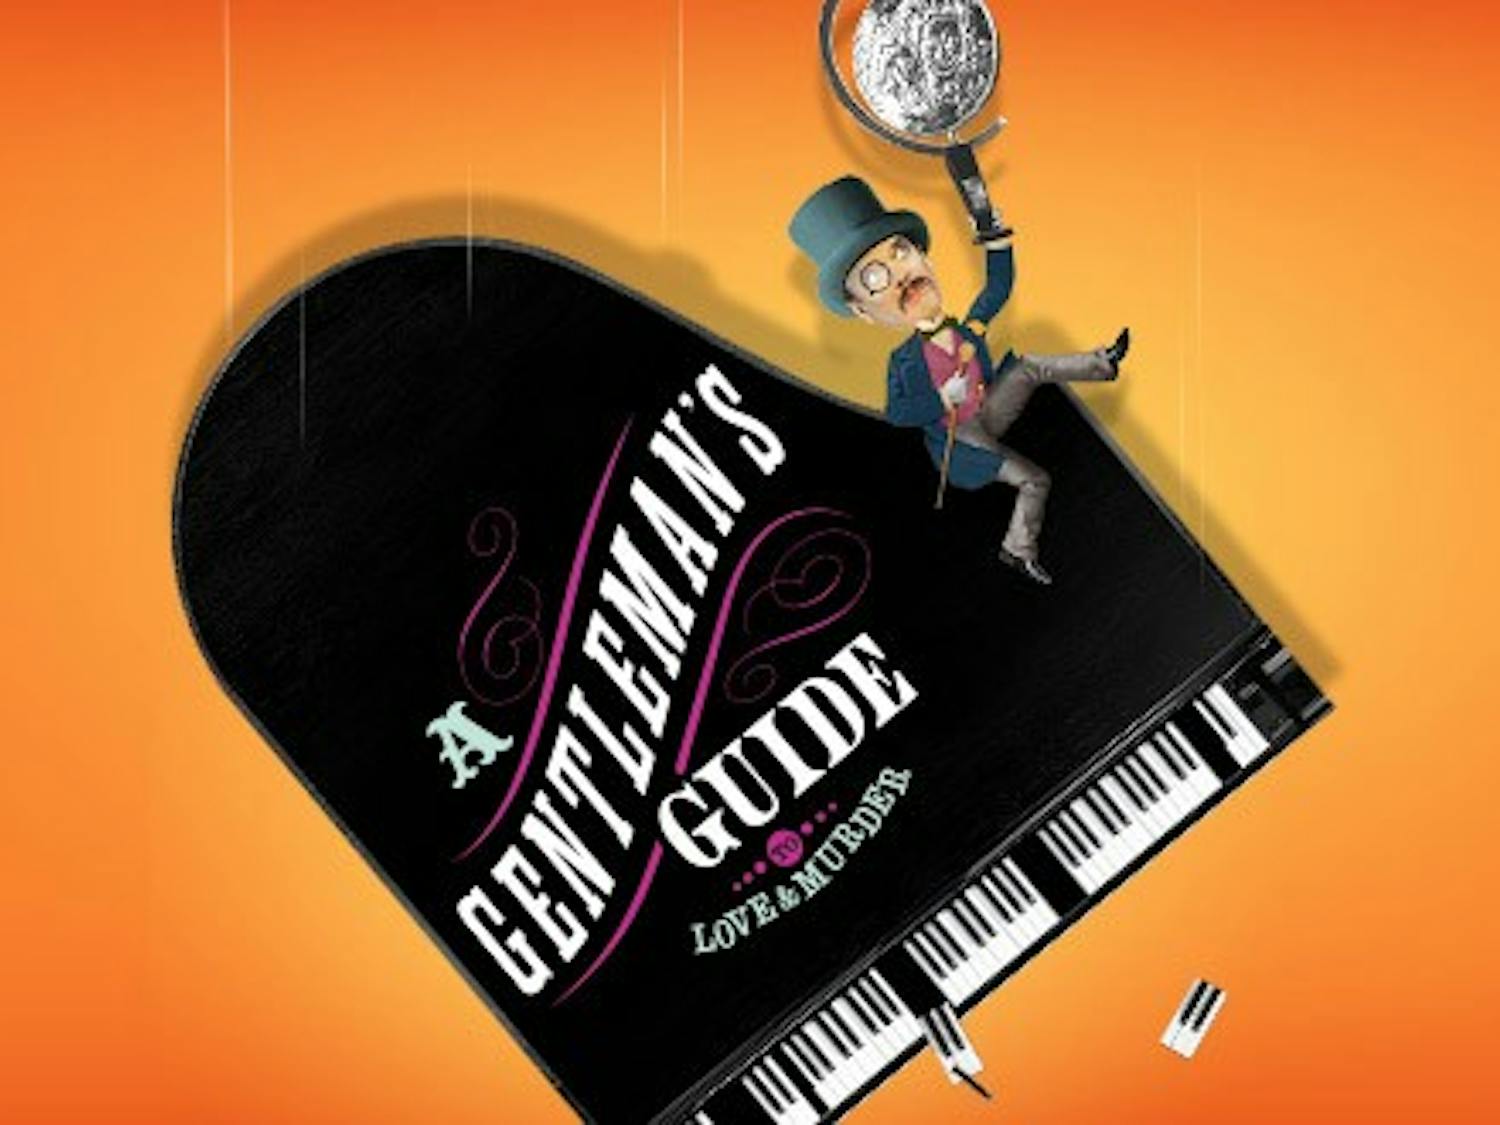 "A Gentleman's Guide to Love and Murder" will run until Sunday, Oct. 8 at the Overture Center.